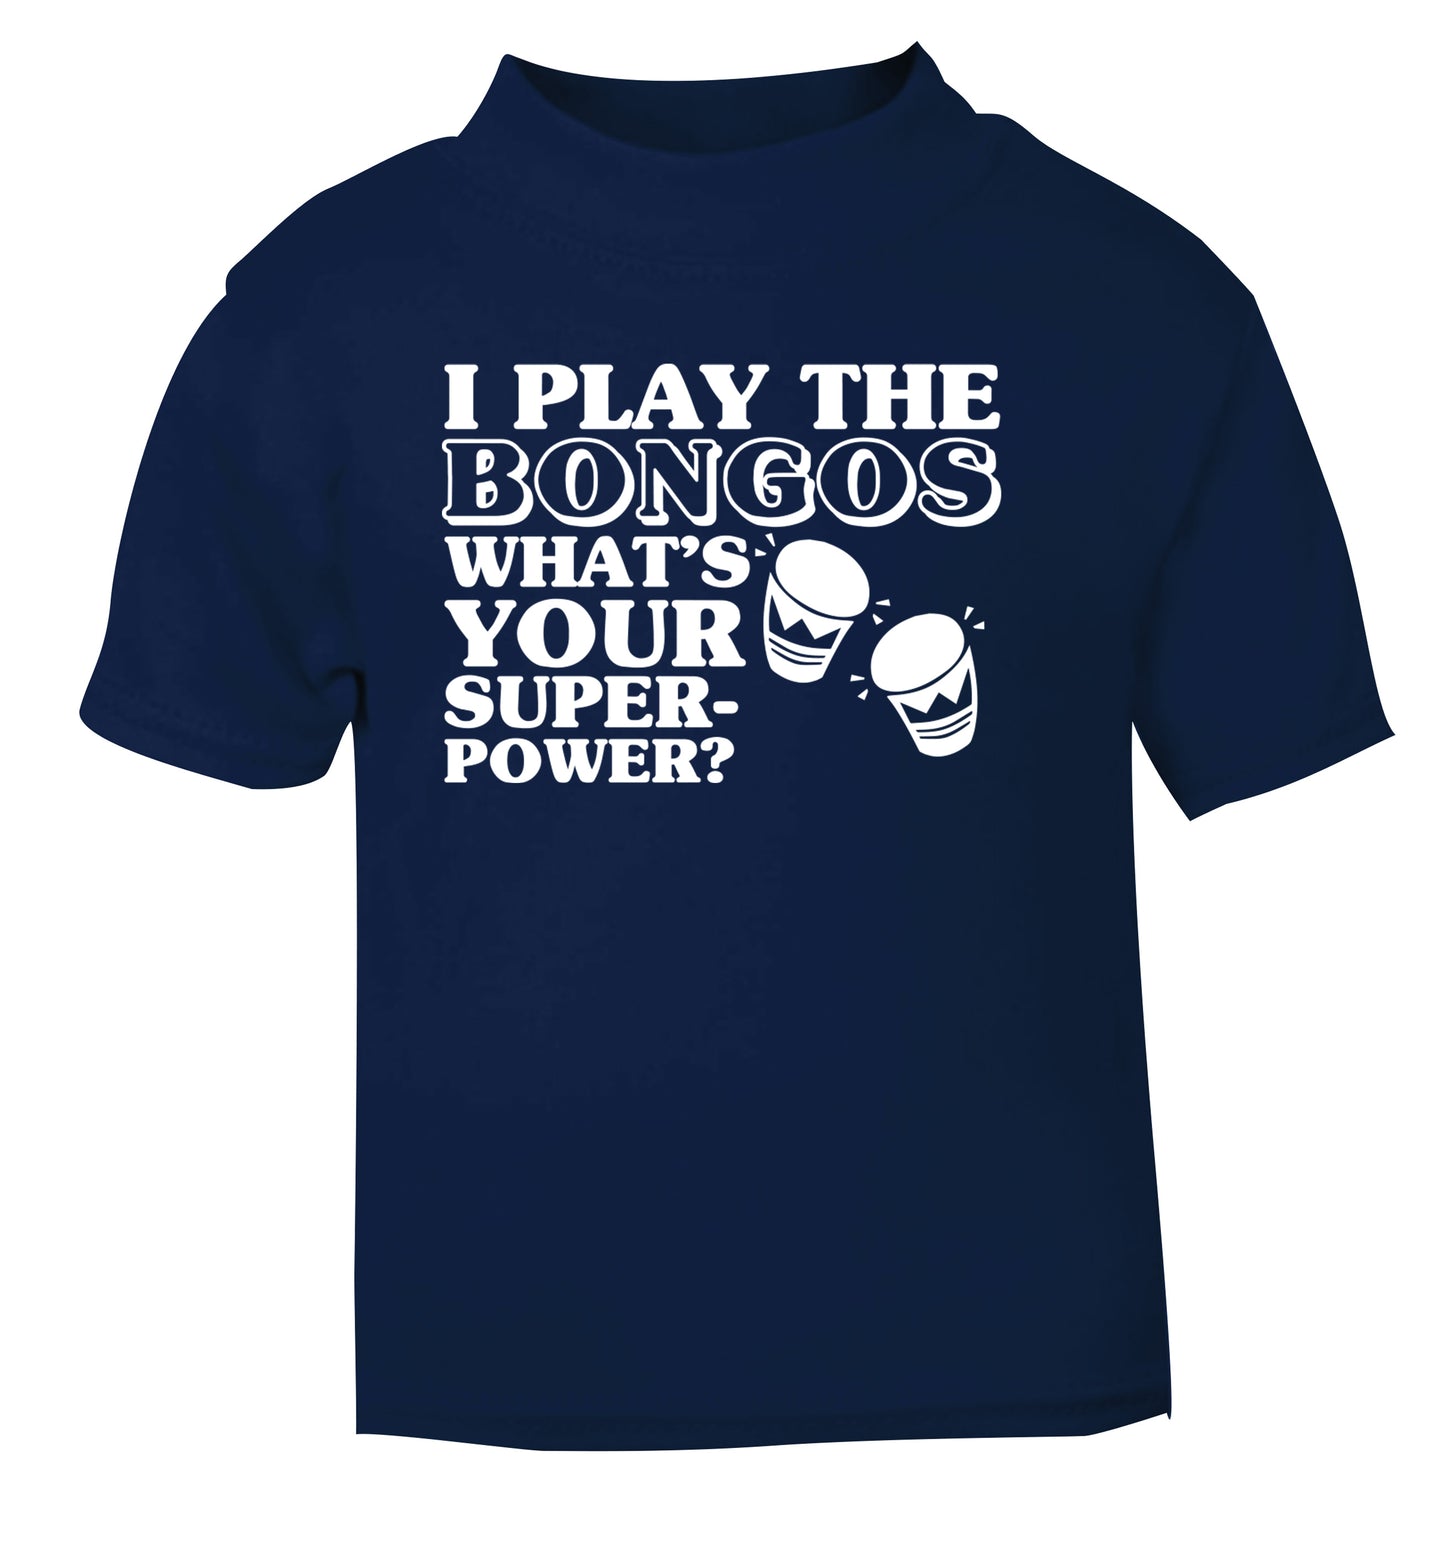 I play the bongos what's your superpower? navy Baby Toddler Tshirt 2 Years